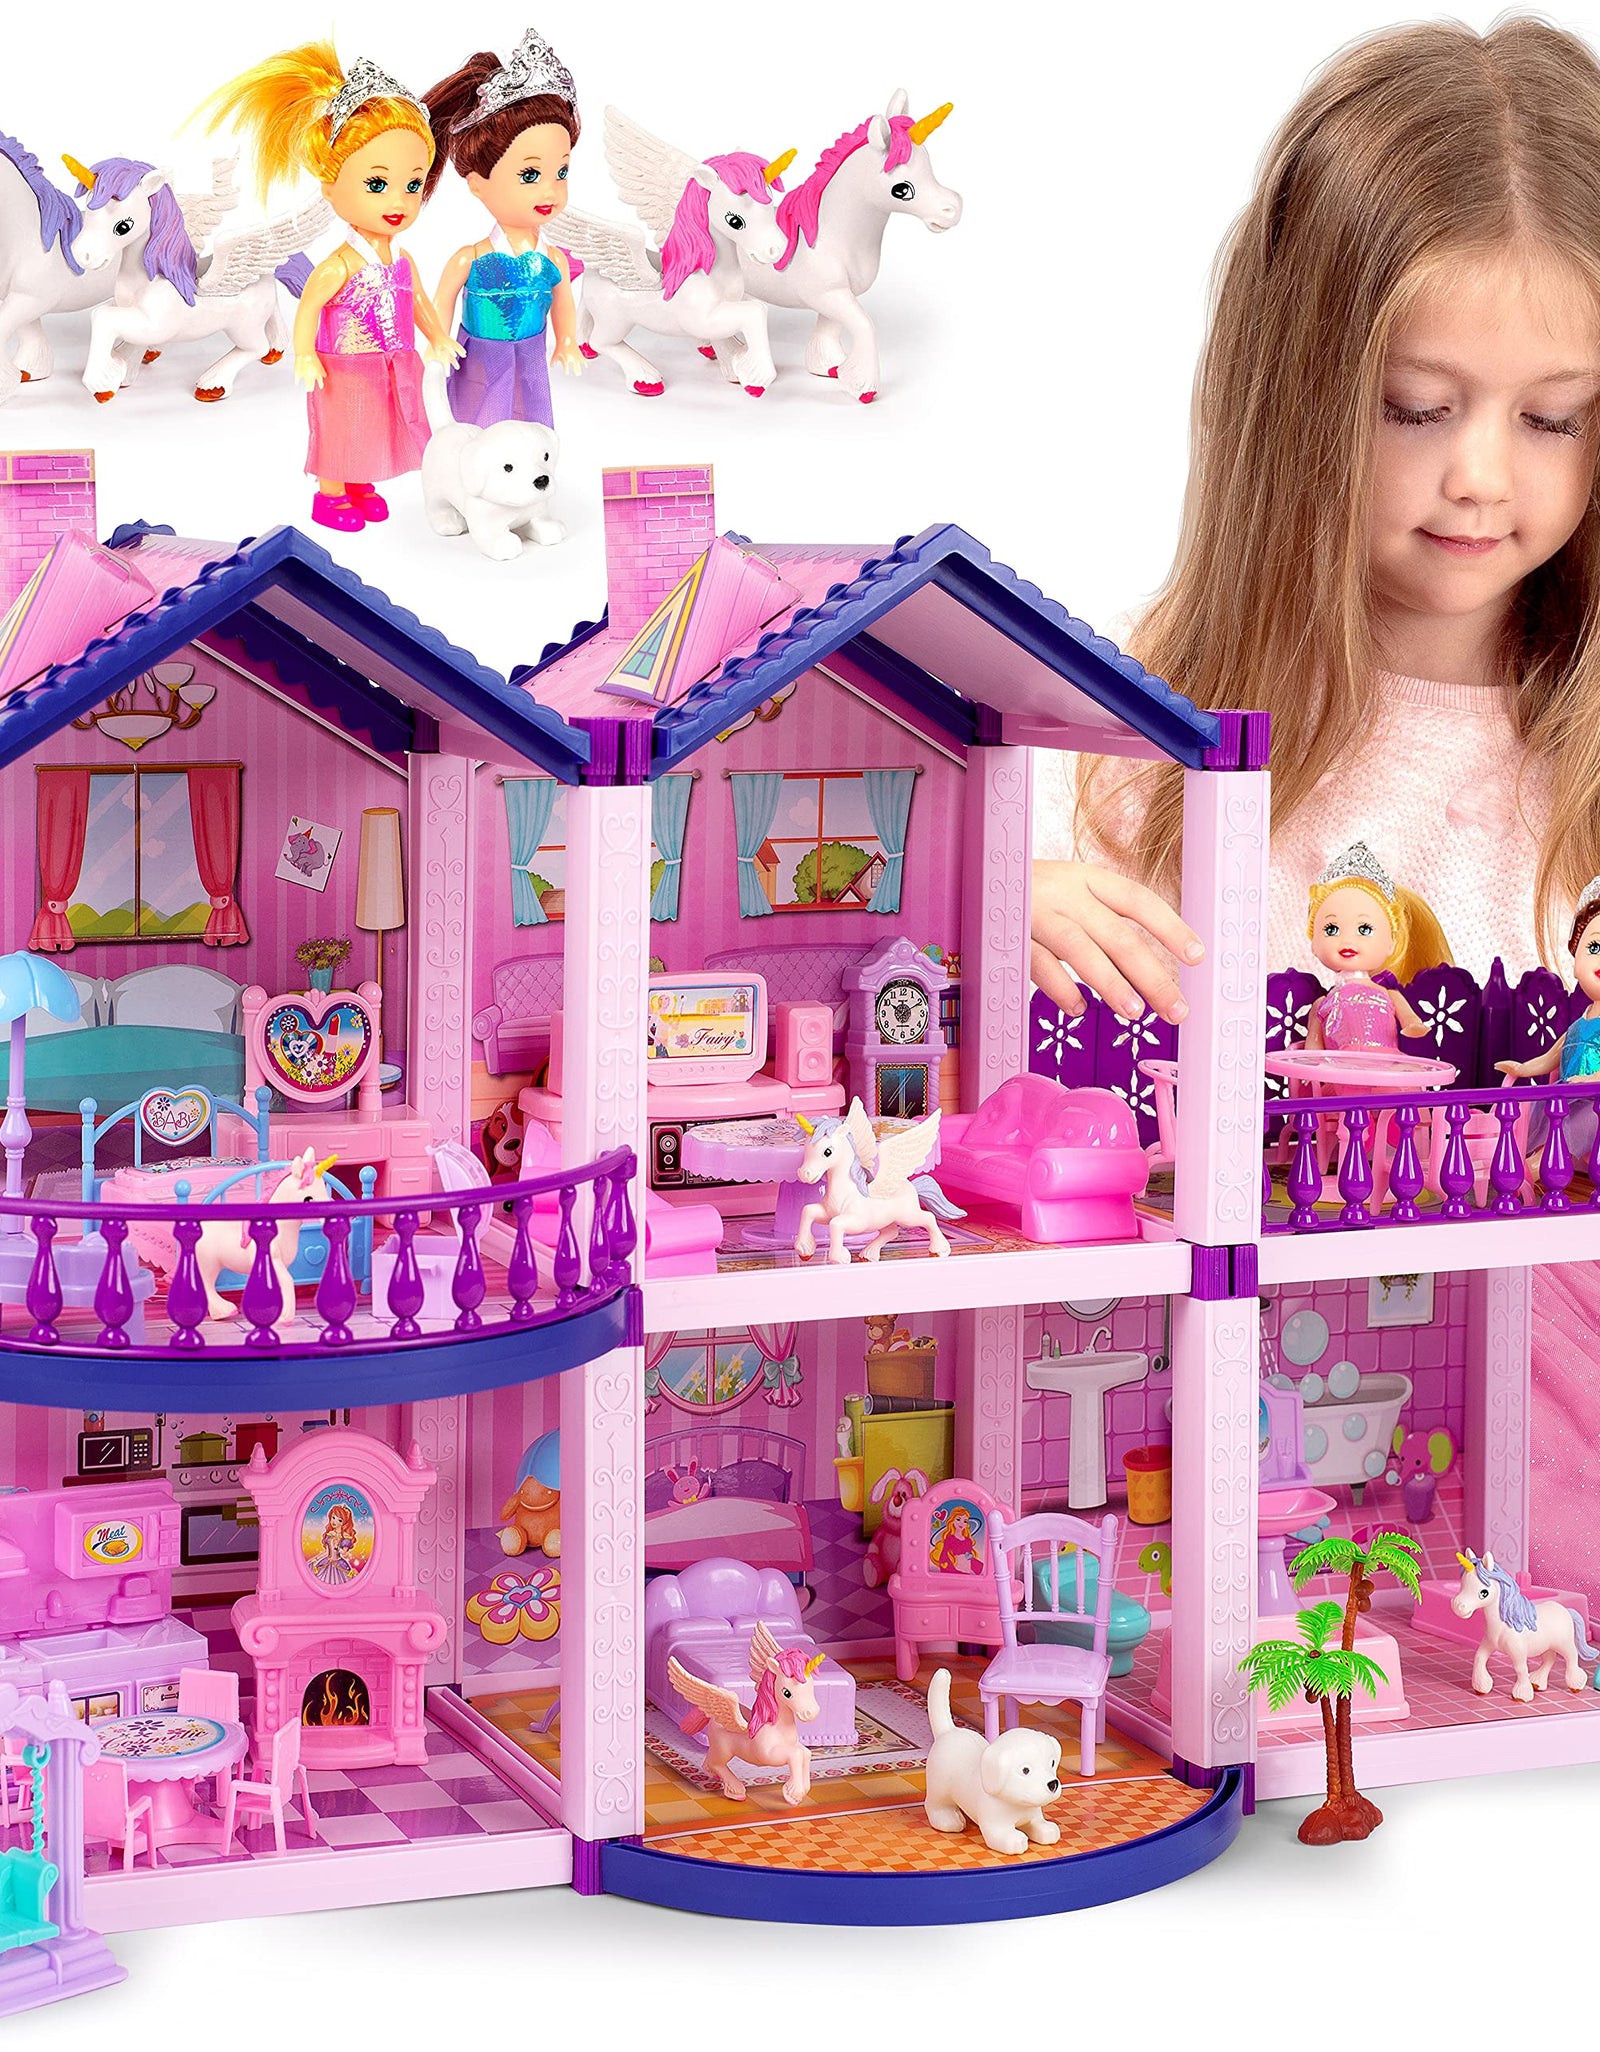 Dollhouse w/ 2 Princesses, 4 Unicorns and Dog Dolls - Pink / Purple Dream House Toy for Little Girls - 4 Rooms w/ Garden - Pretend Play for Toddlers w/ Furniture and Accessories - Girls Ages 3 - 6